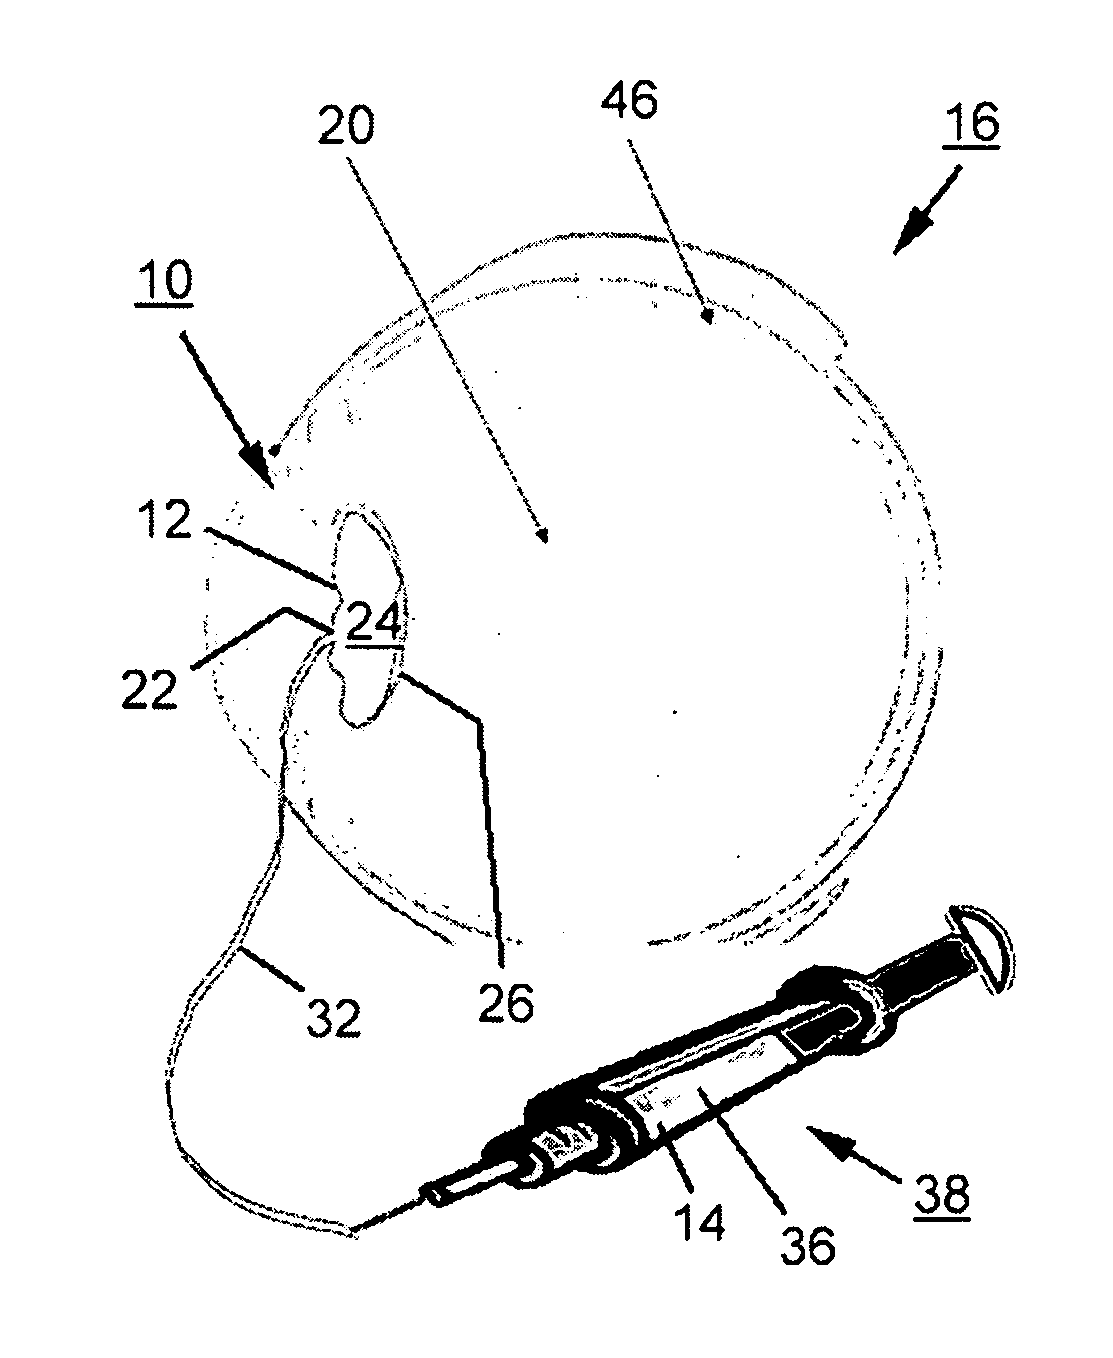 Eye implant and methods of positioning an artificial eye implant within the eye of a human or an animal